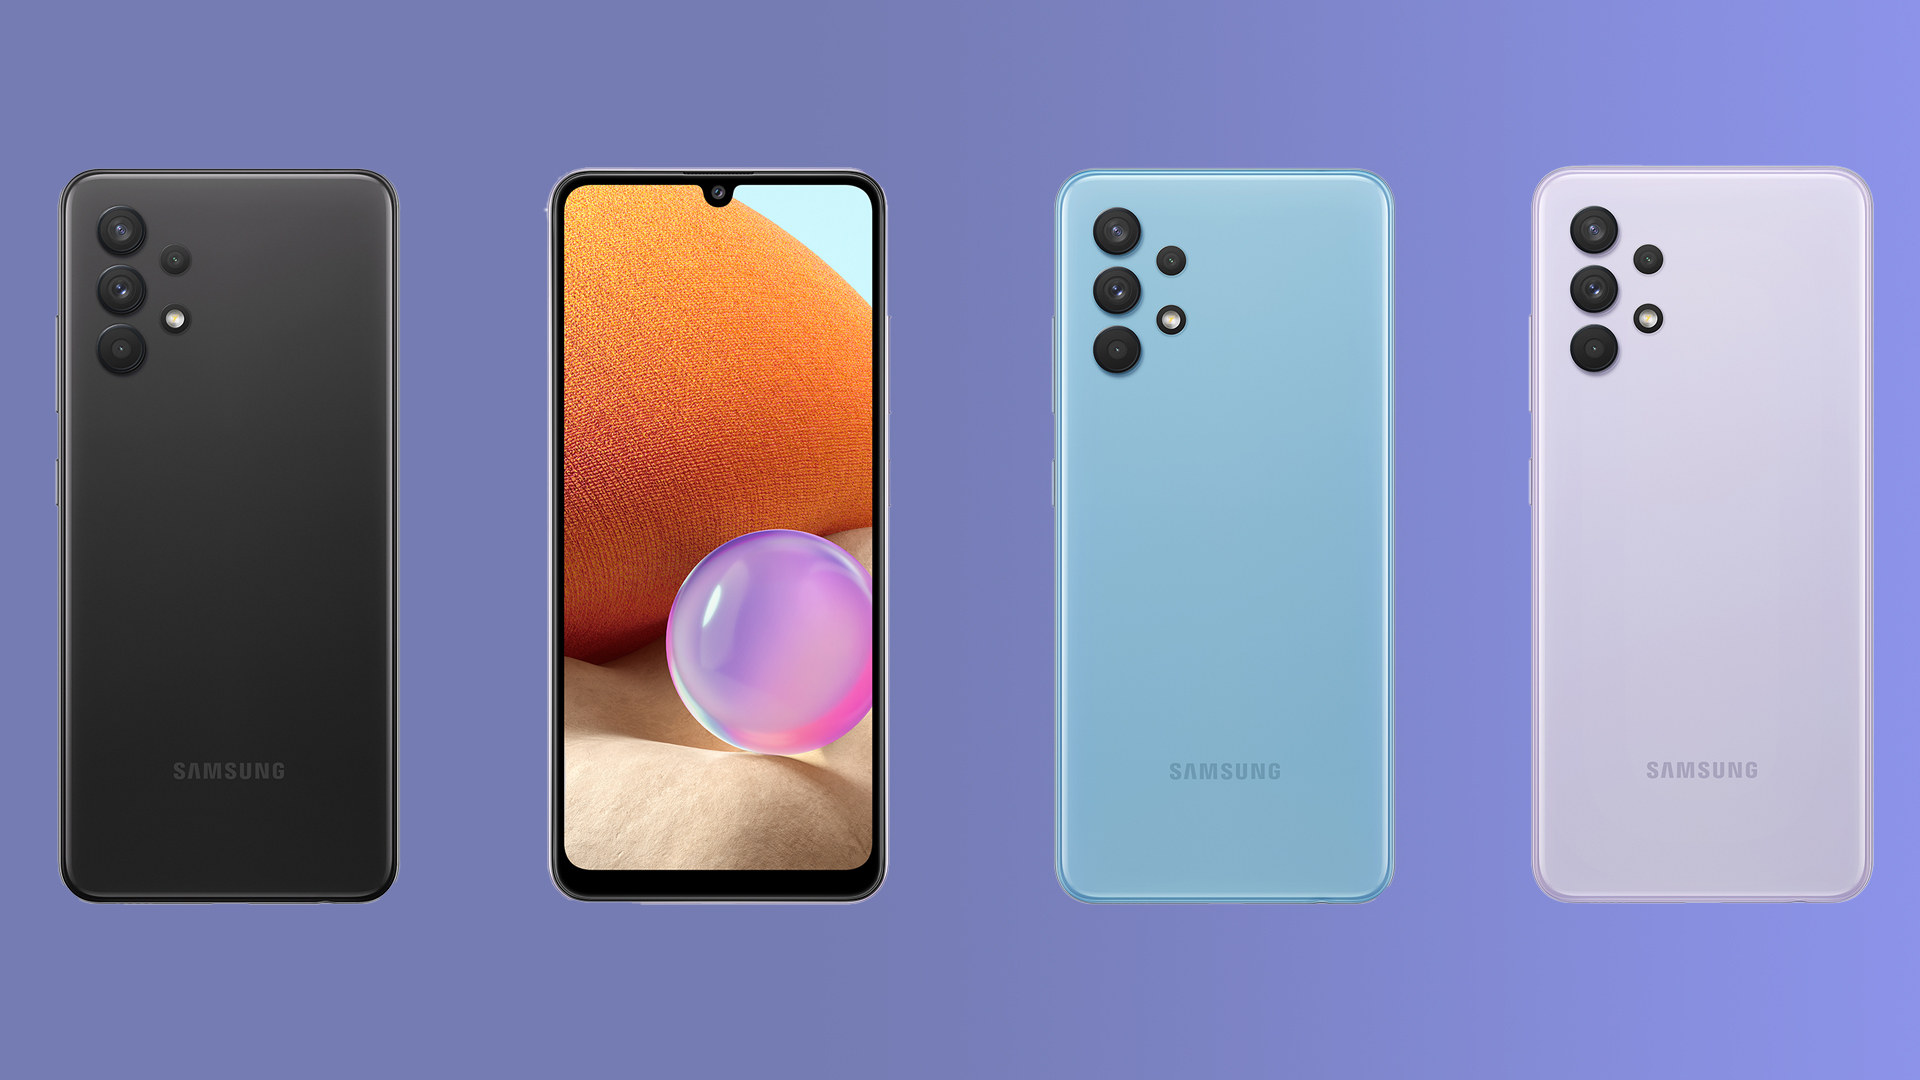 PSA: Galaxy Note 10 Plus 5G is not a dual SIM smartphone - SamMobile